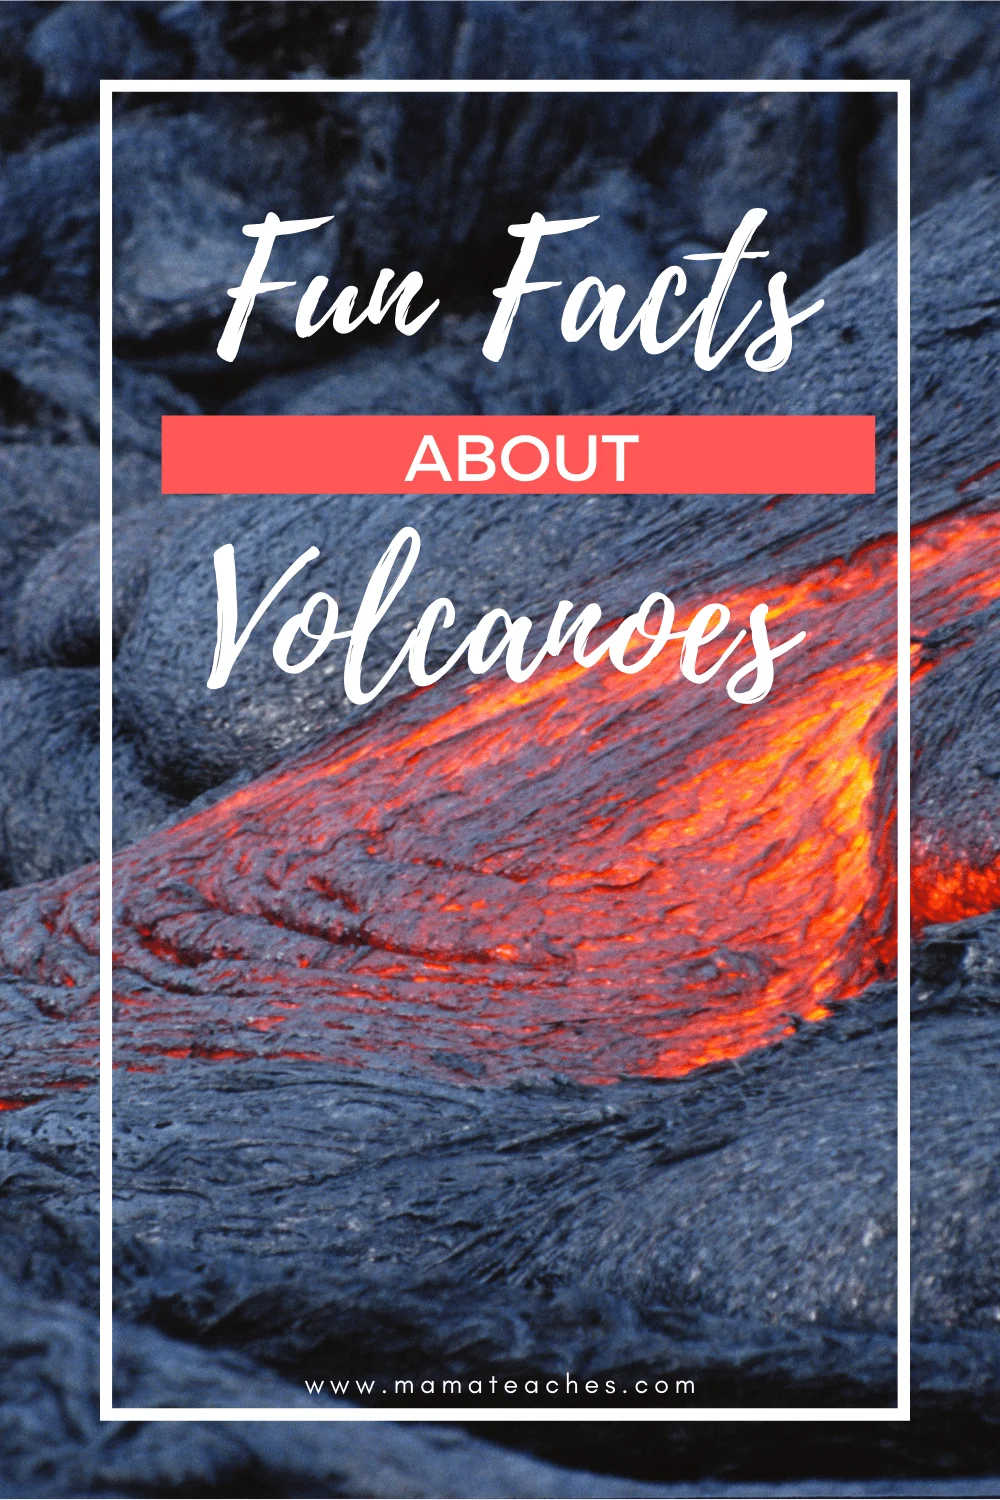 Fun Facts About Volcanoes